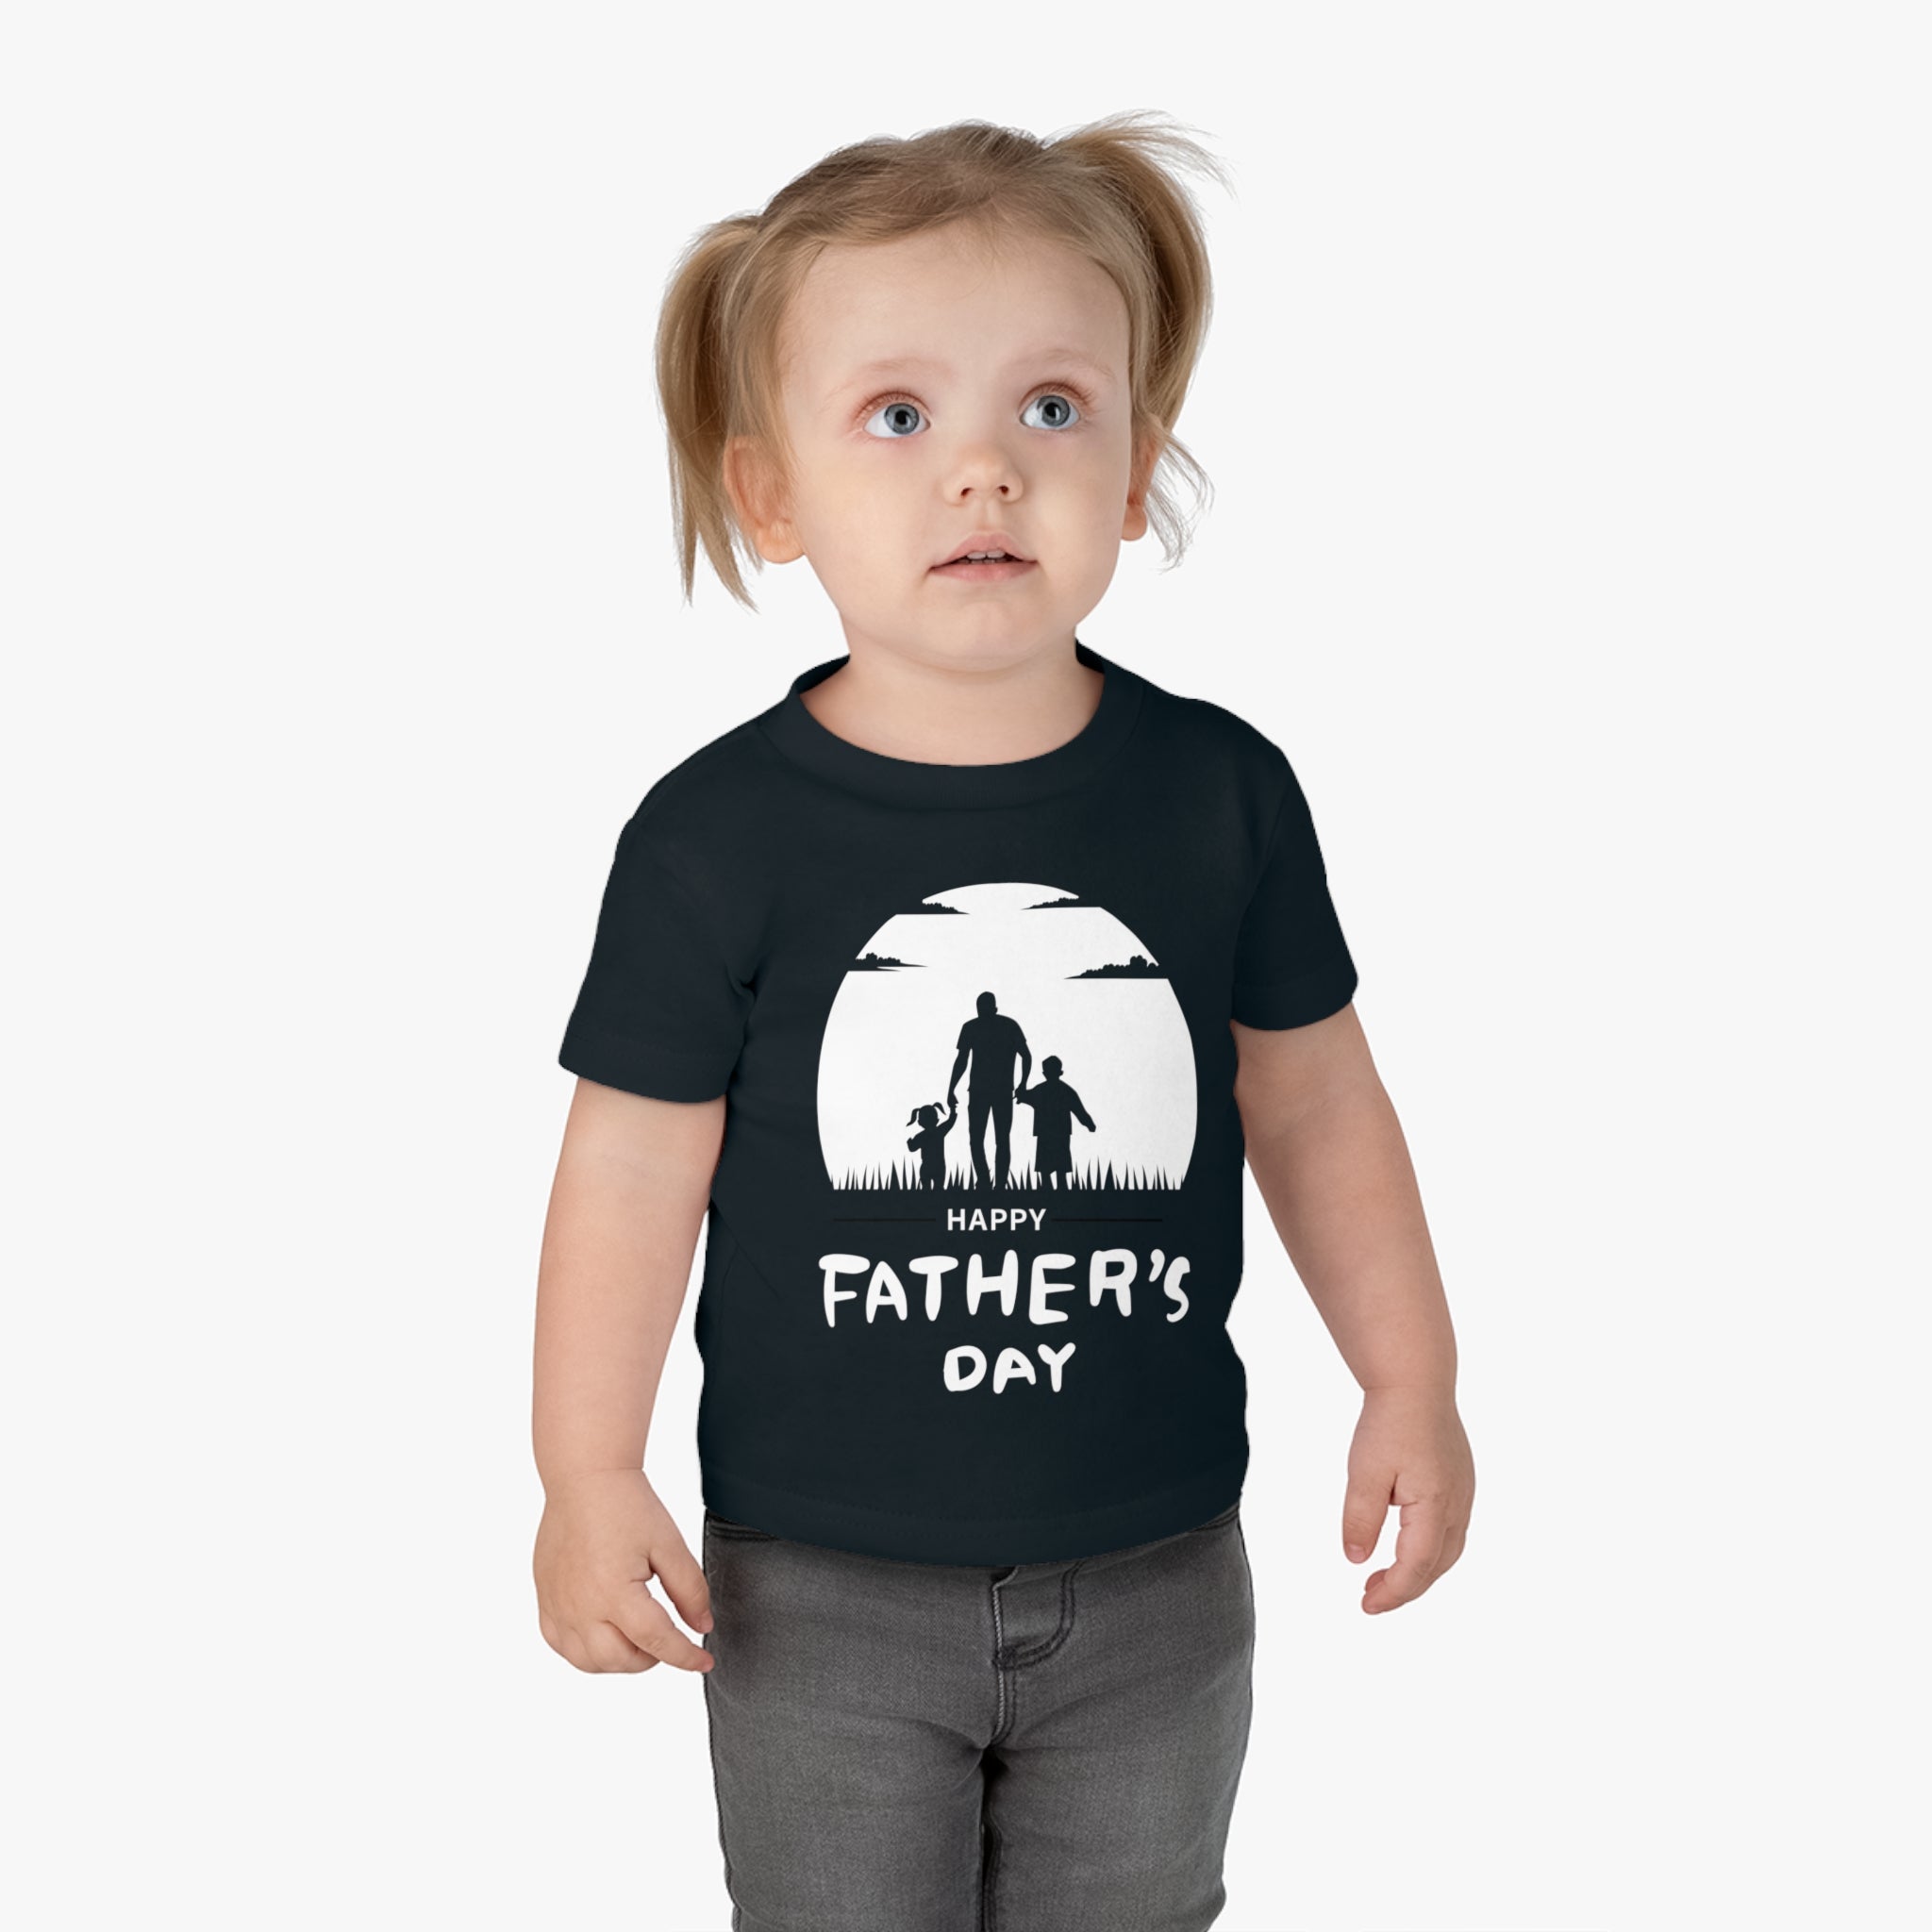 Happy Father's Day Infant Shirt, Baby Tee, Infant Tee